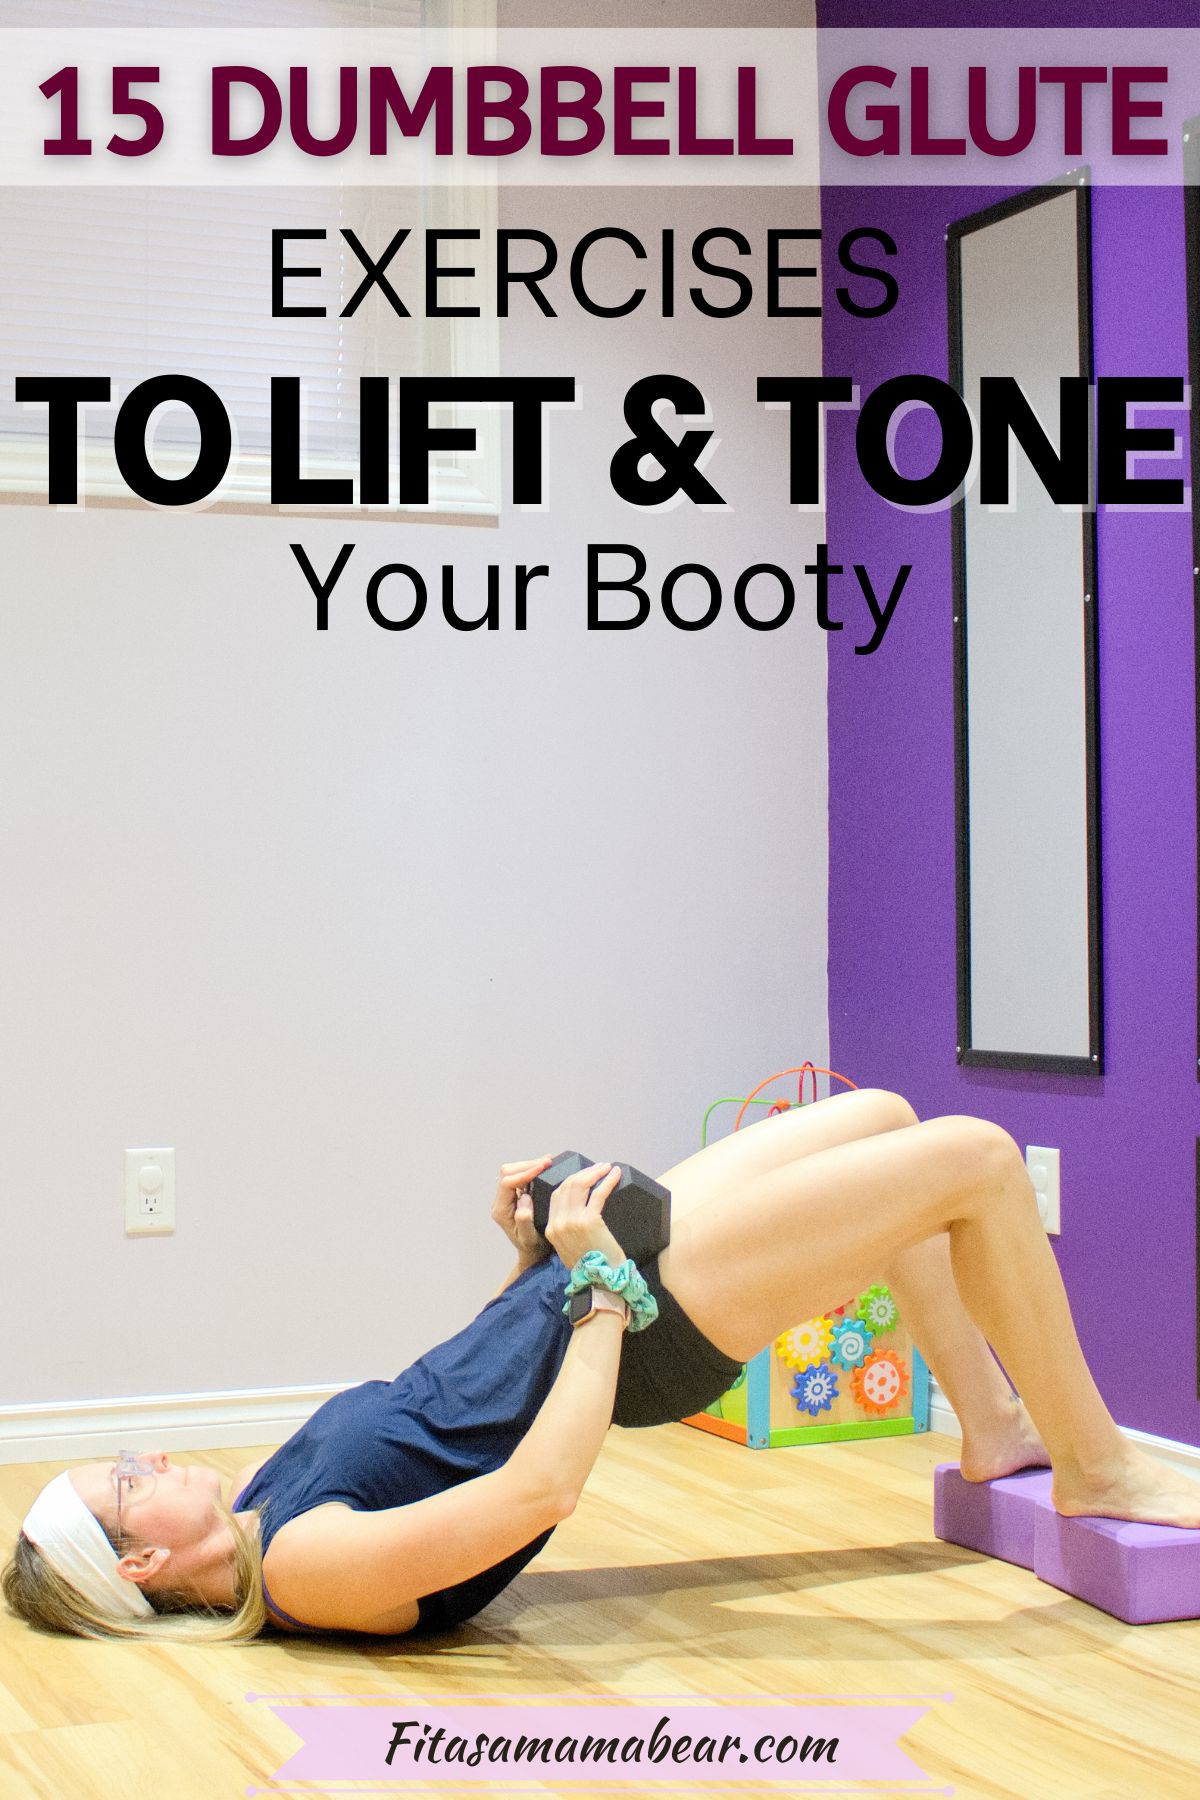 Strengthen and tone your legs and glutes with Pilates exercises